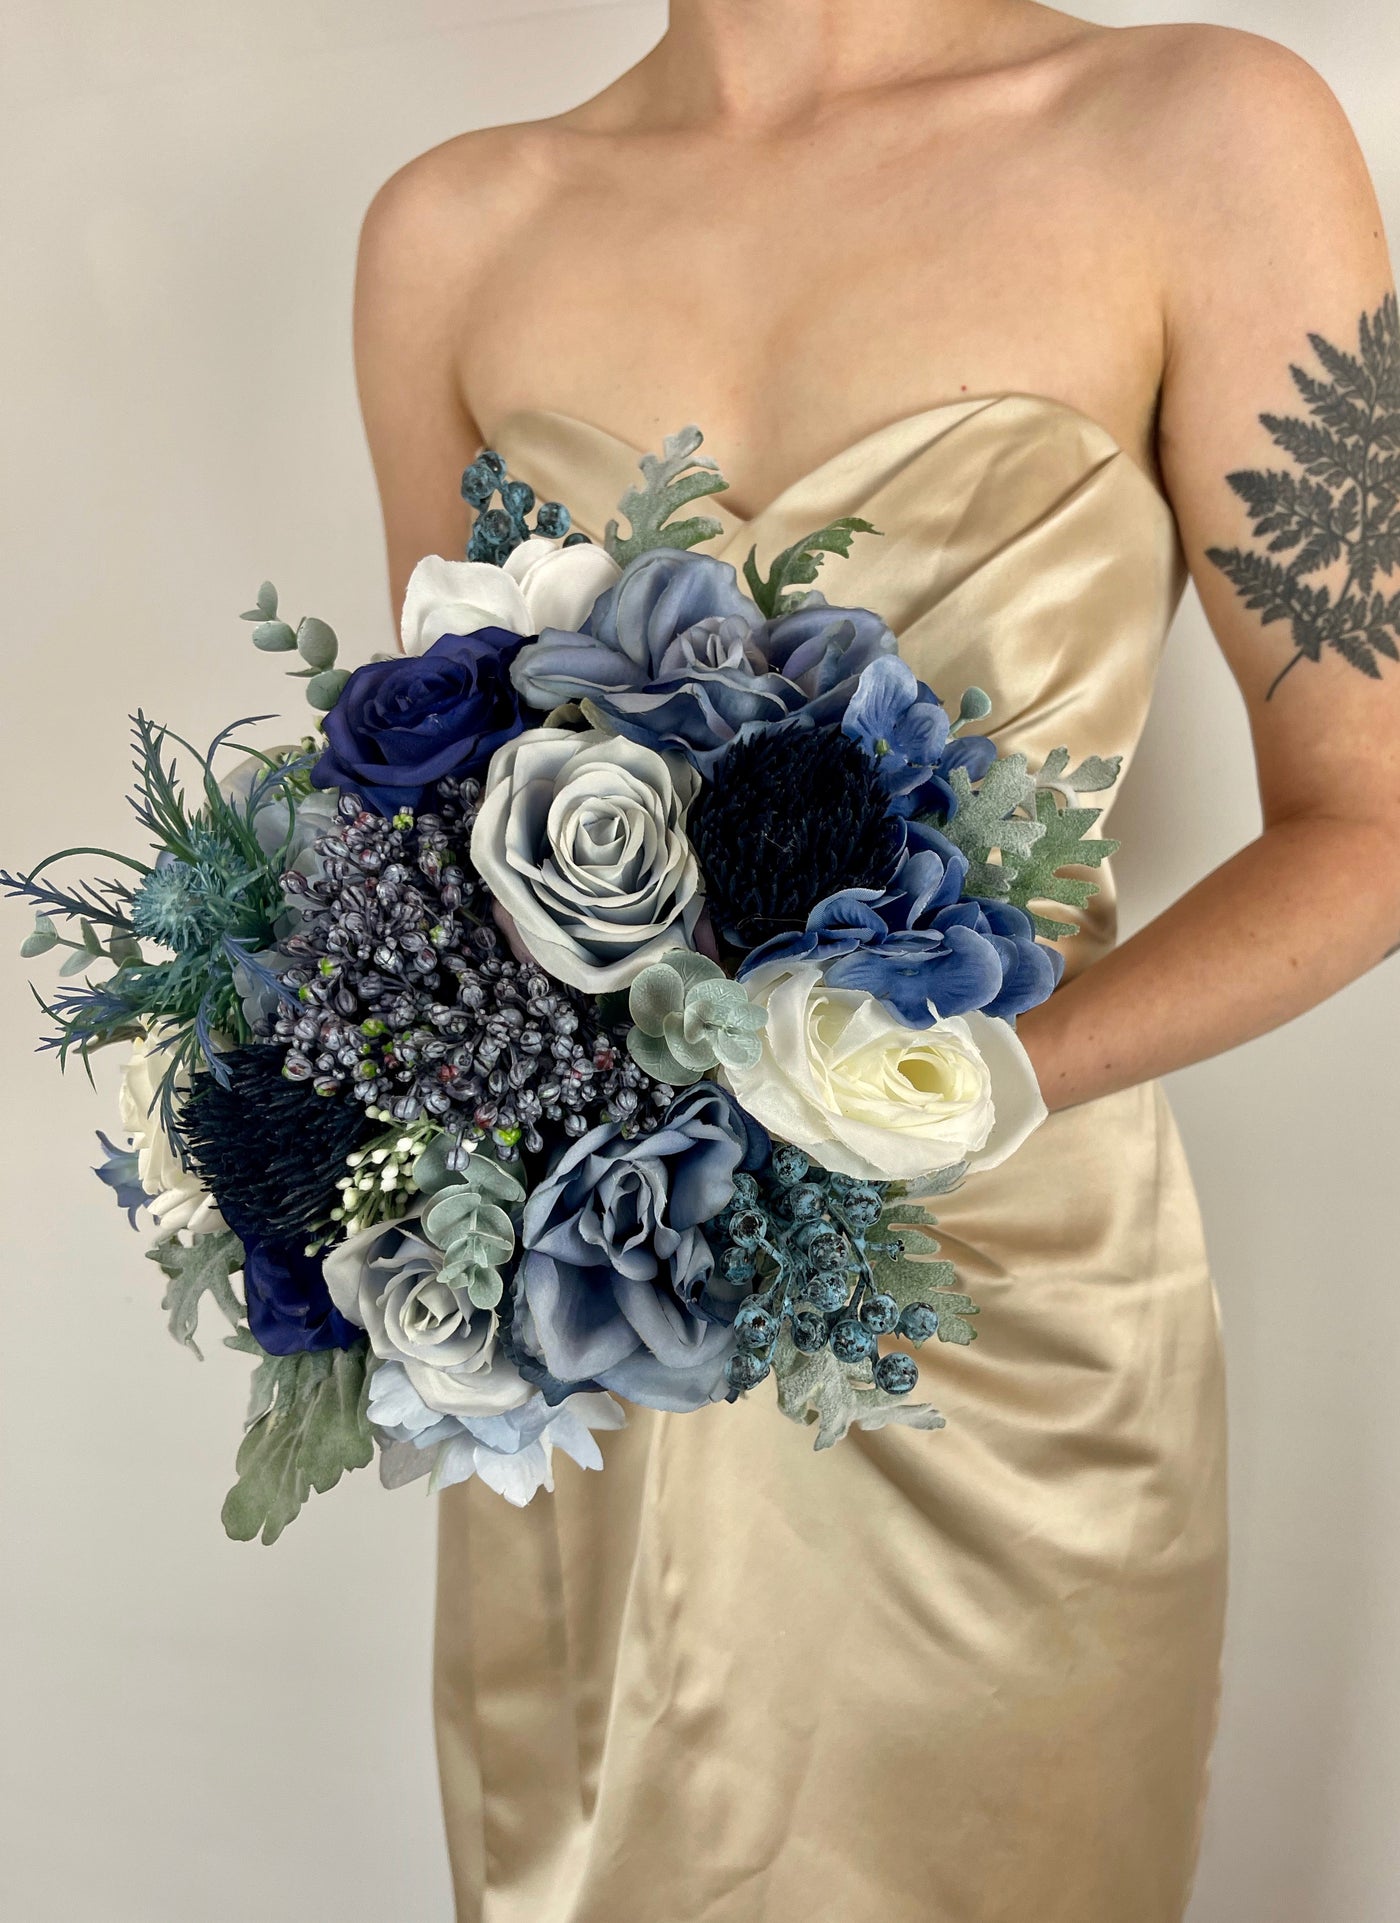 Blue bridesmaid bouquet being held by woman in champaign  coloured dress.